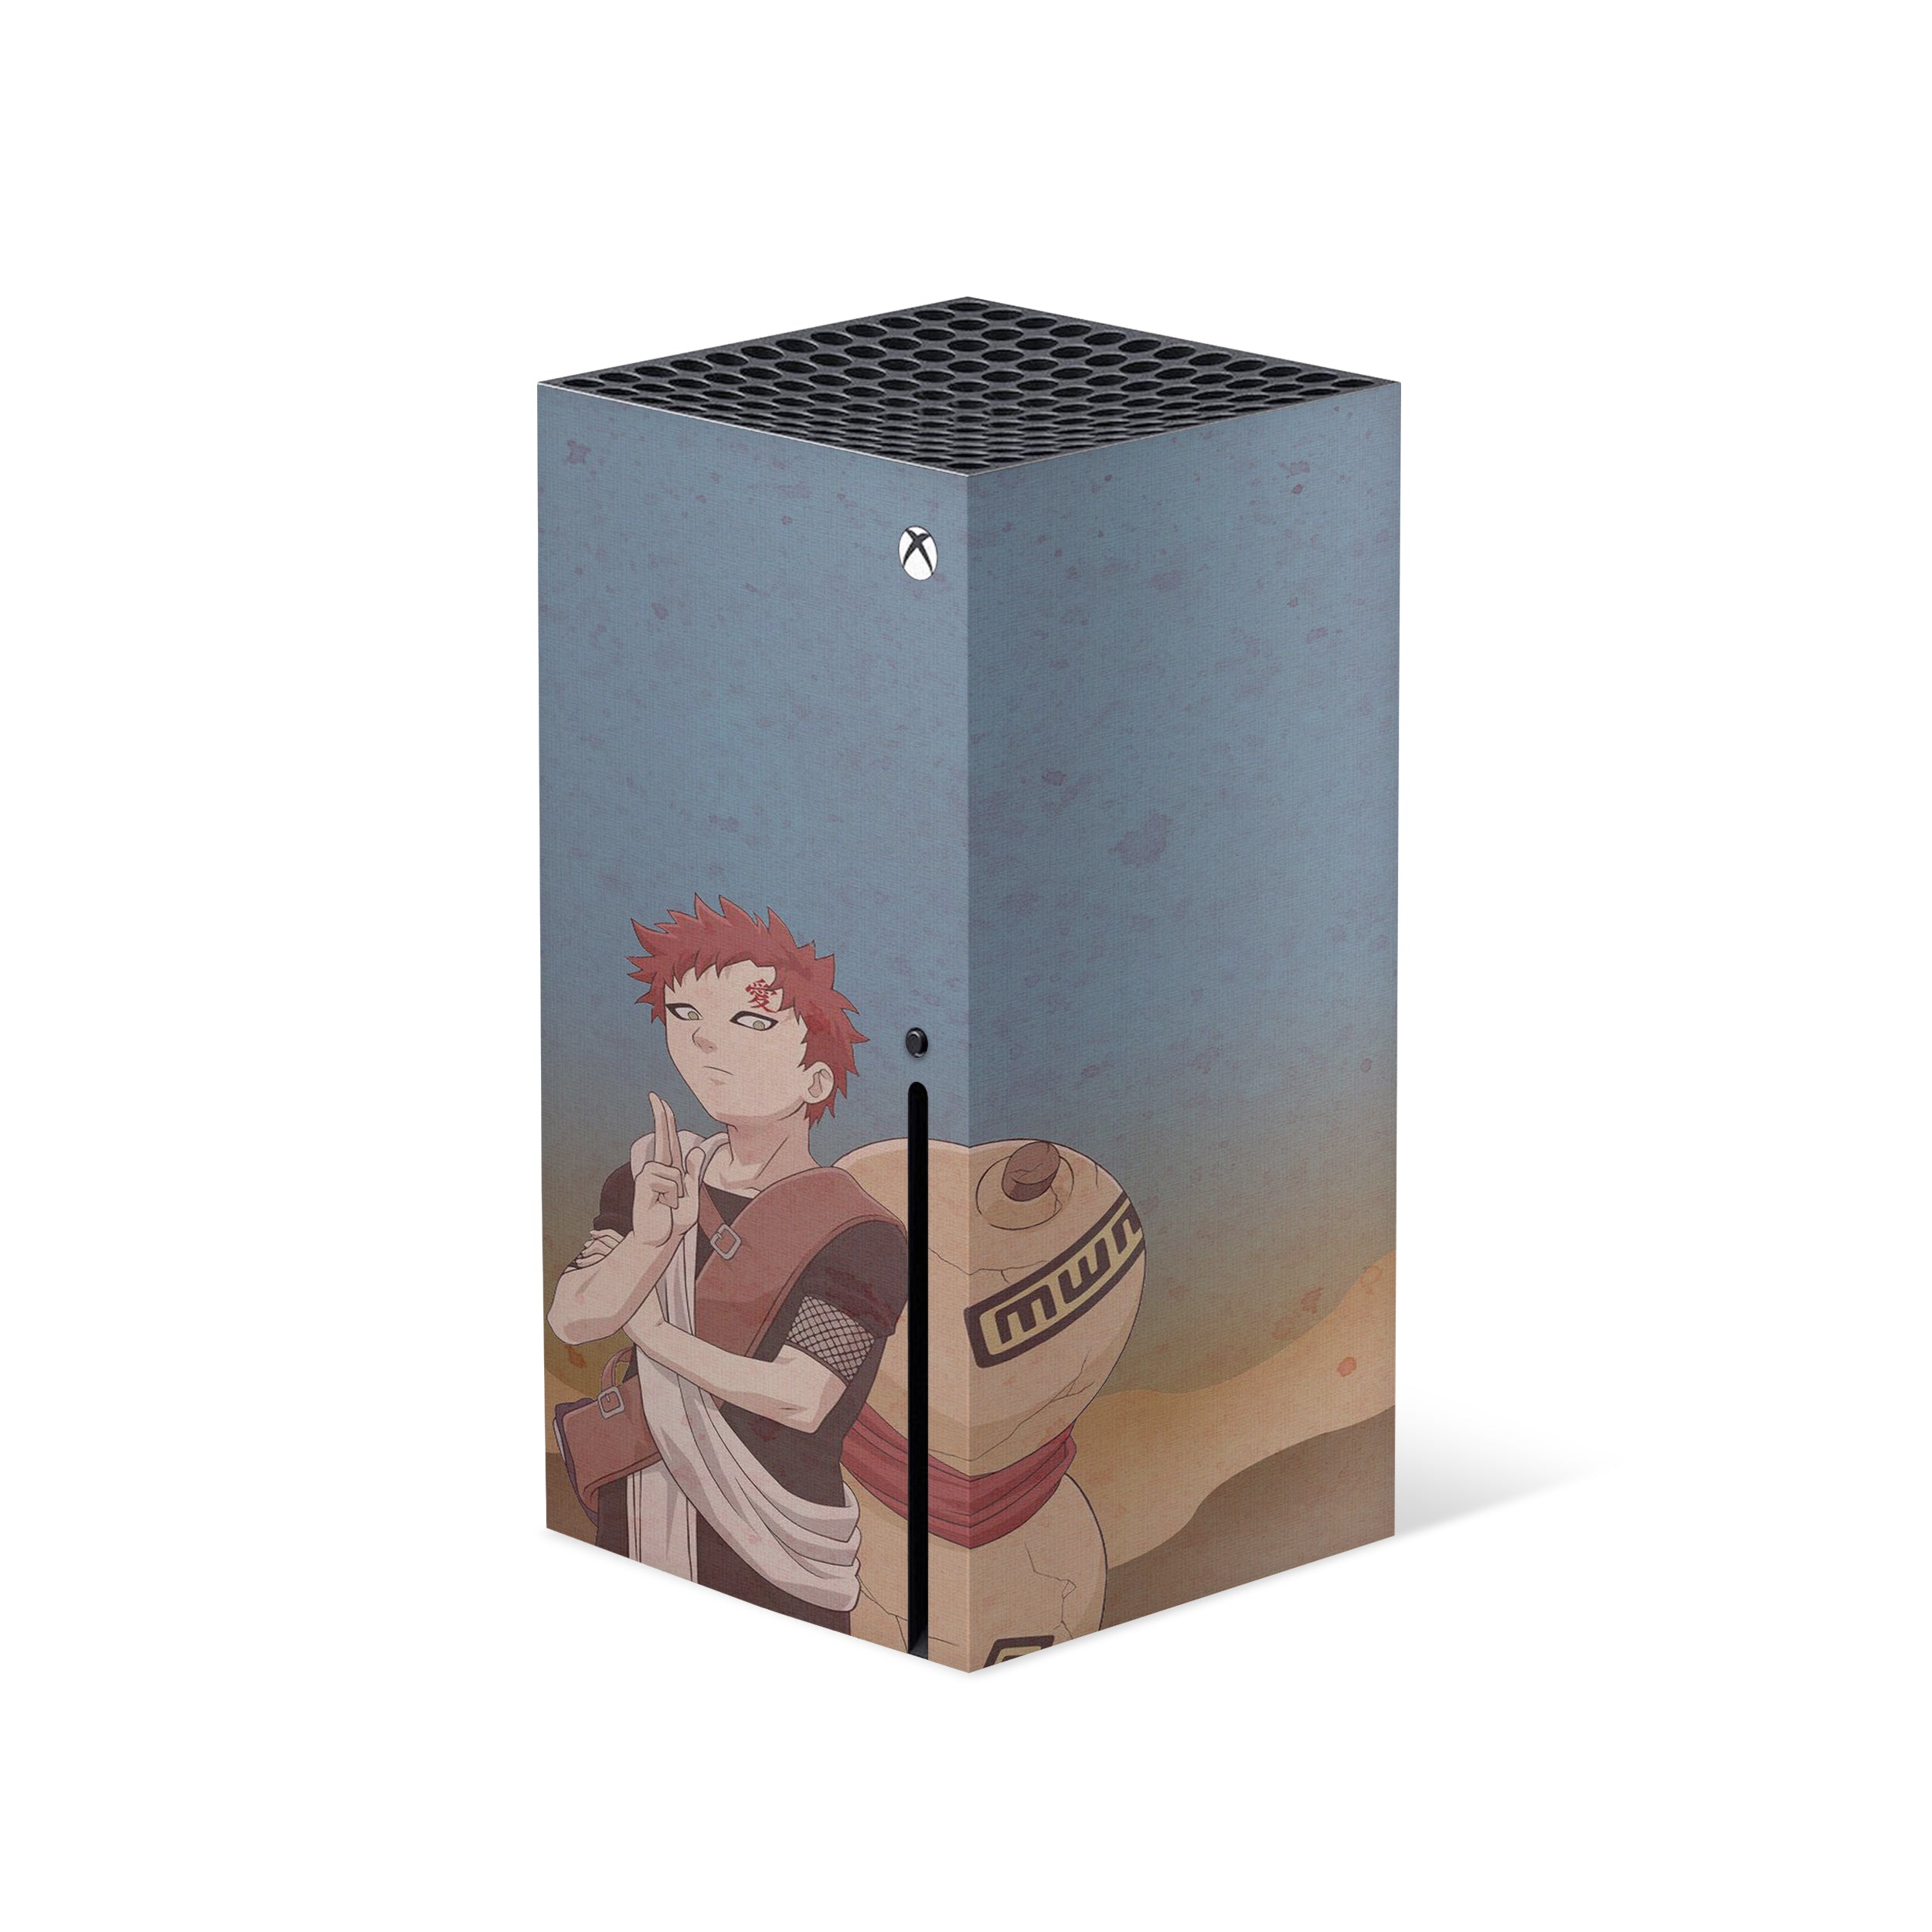 A video game skin featuring a Naruto Gaara design for the Xbox Series X.